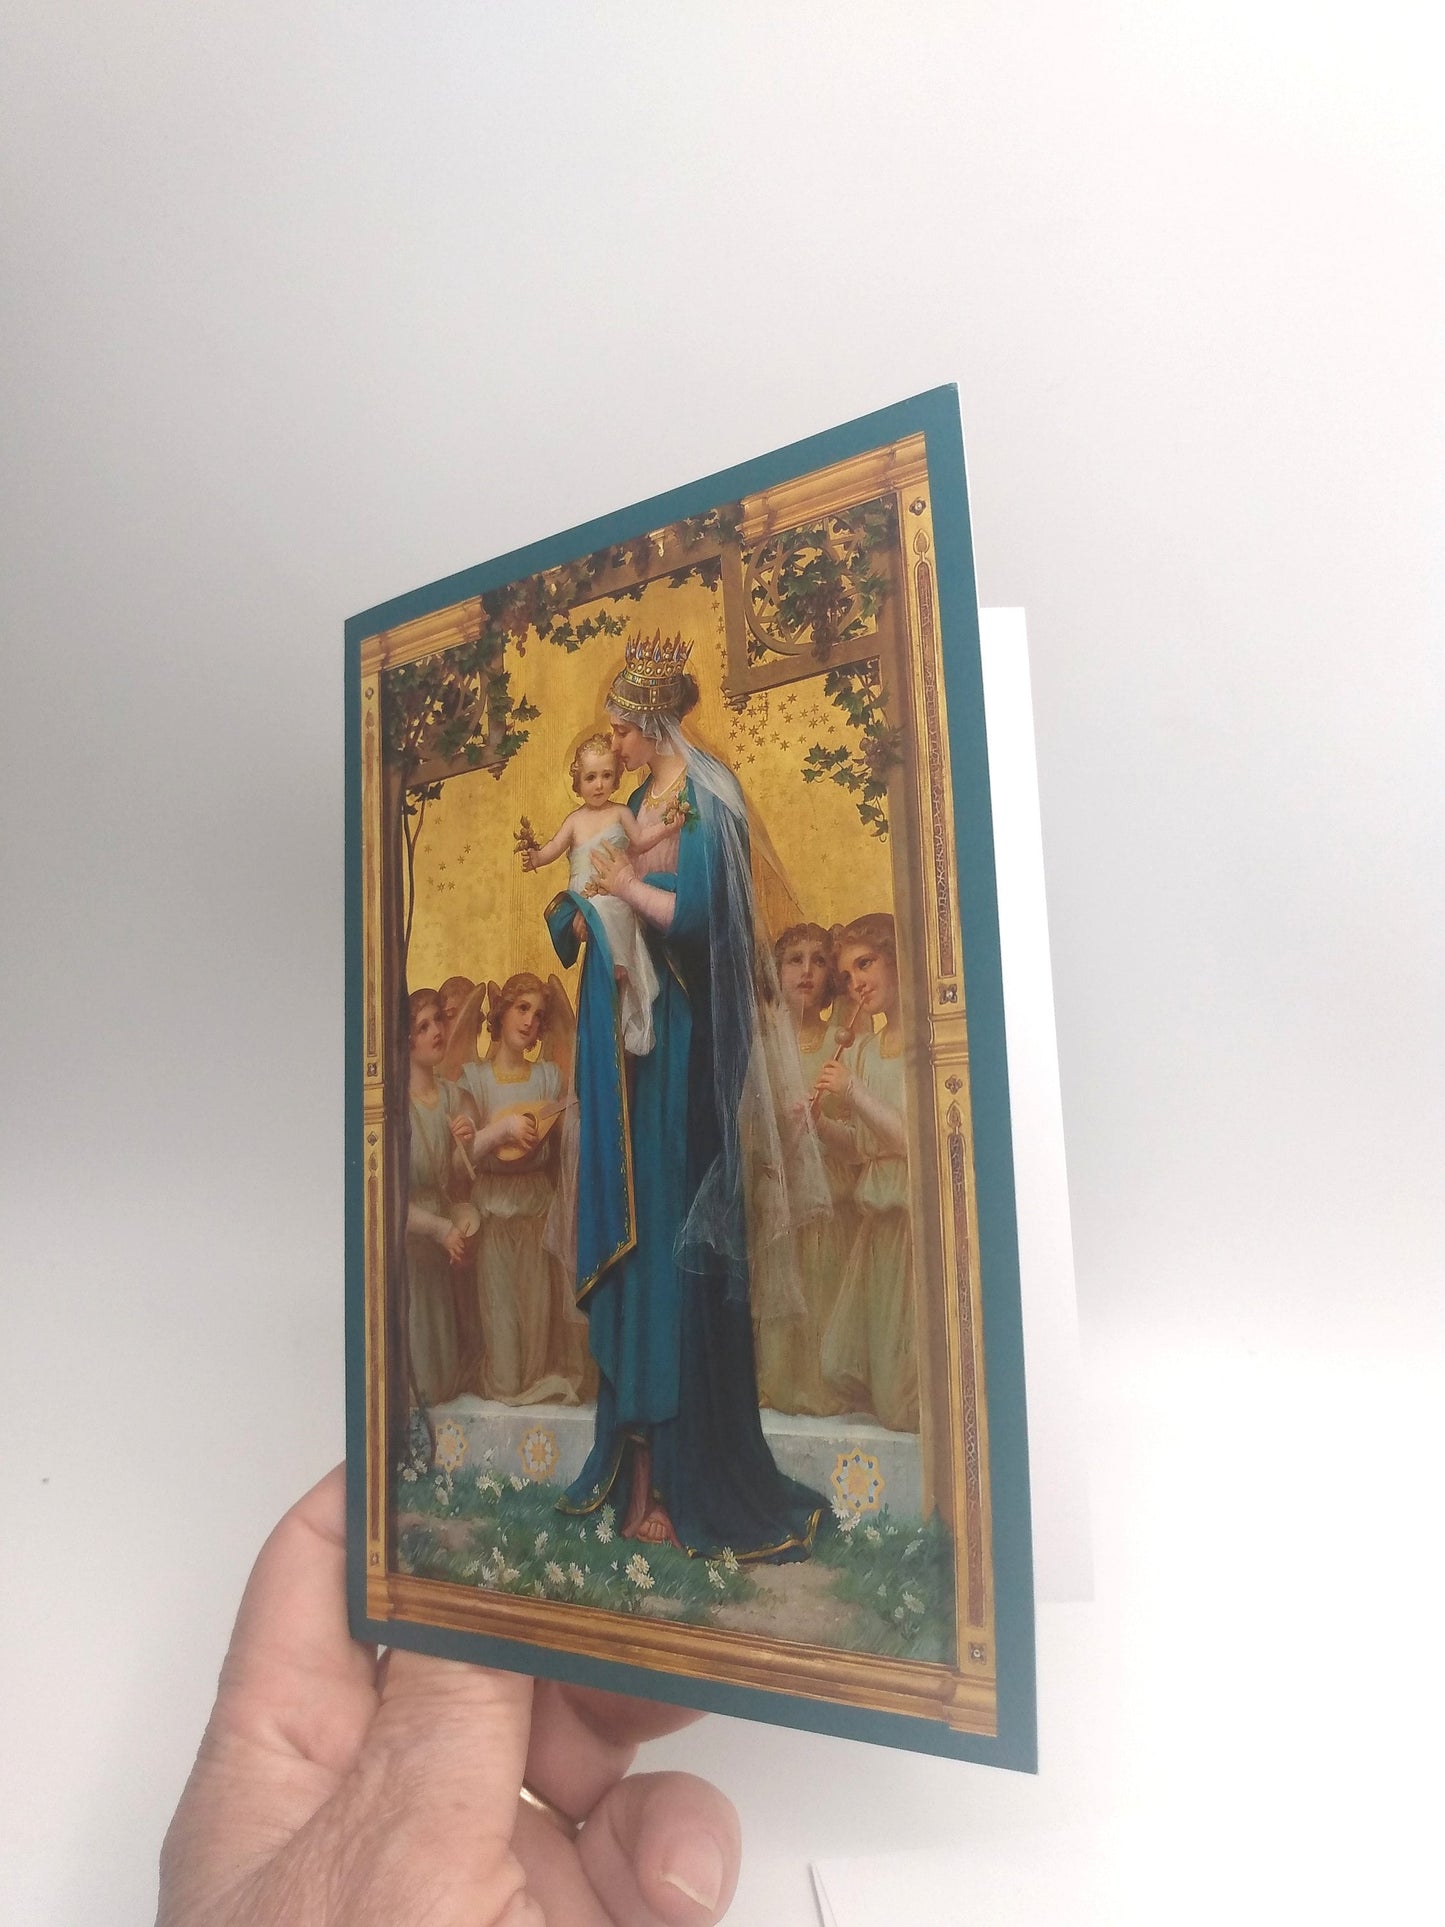 New for 2023! Christmas Card / Greeting Card – Madonna and Child – 5x7" – With Envelope – 1 / 10 / 50 / 100 – by Enric Monserdà Vidal